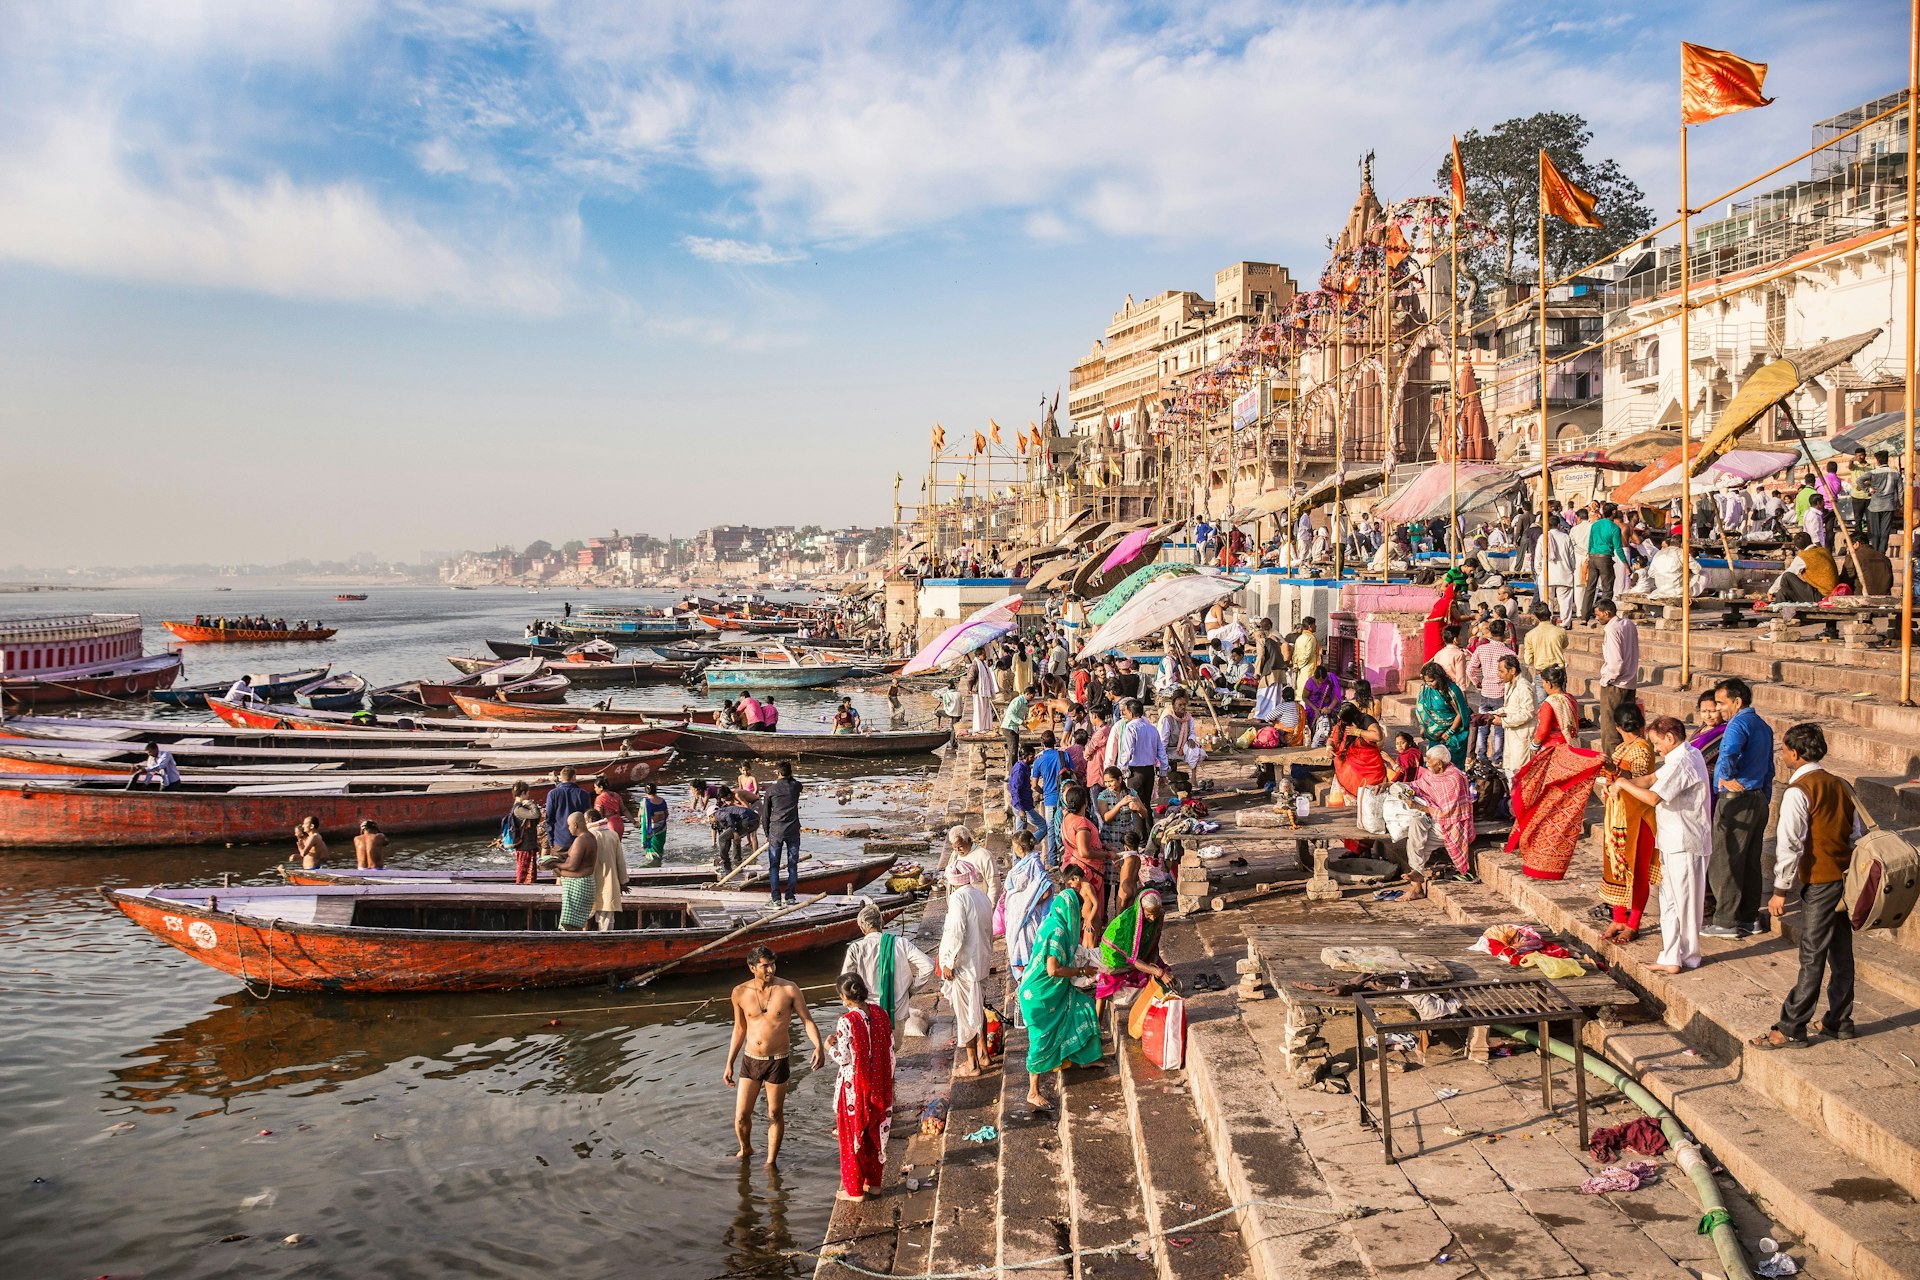 Scores of people are gathered at steps leading down to the Ganges River at Varanasi; some are standing in the water, and some are sitting in long, narrow boats moored at the water's edge.